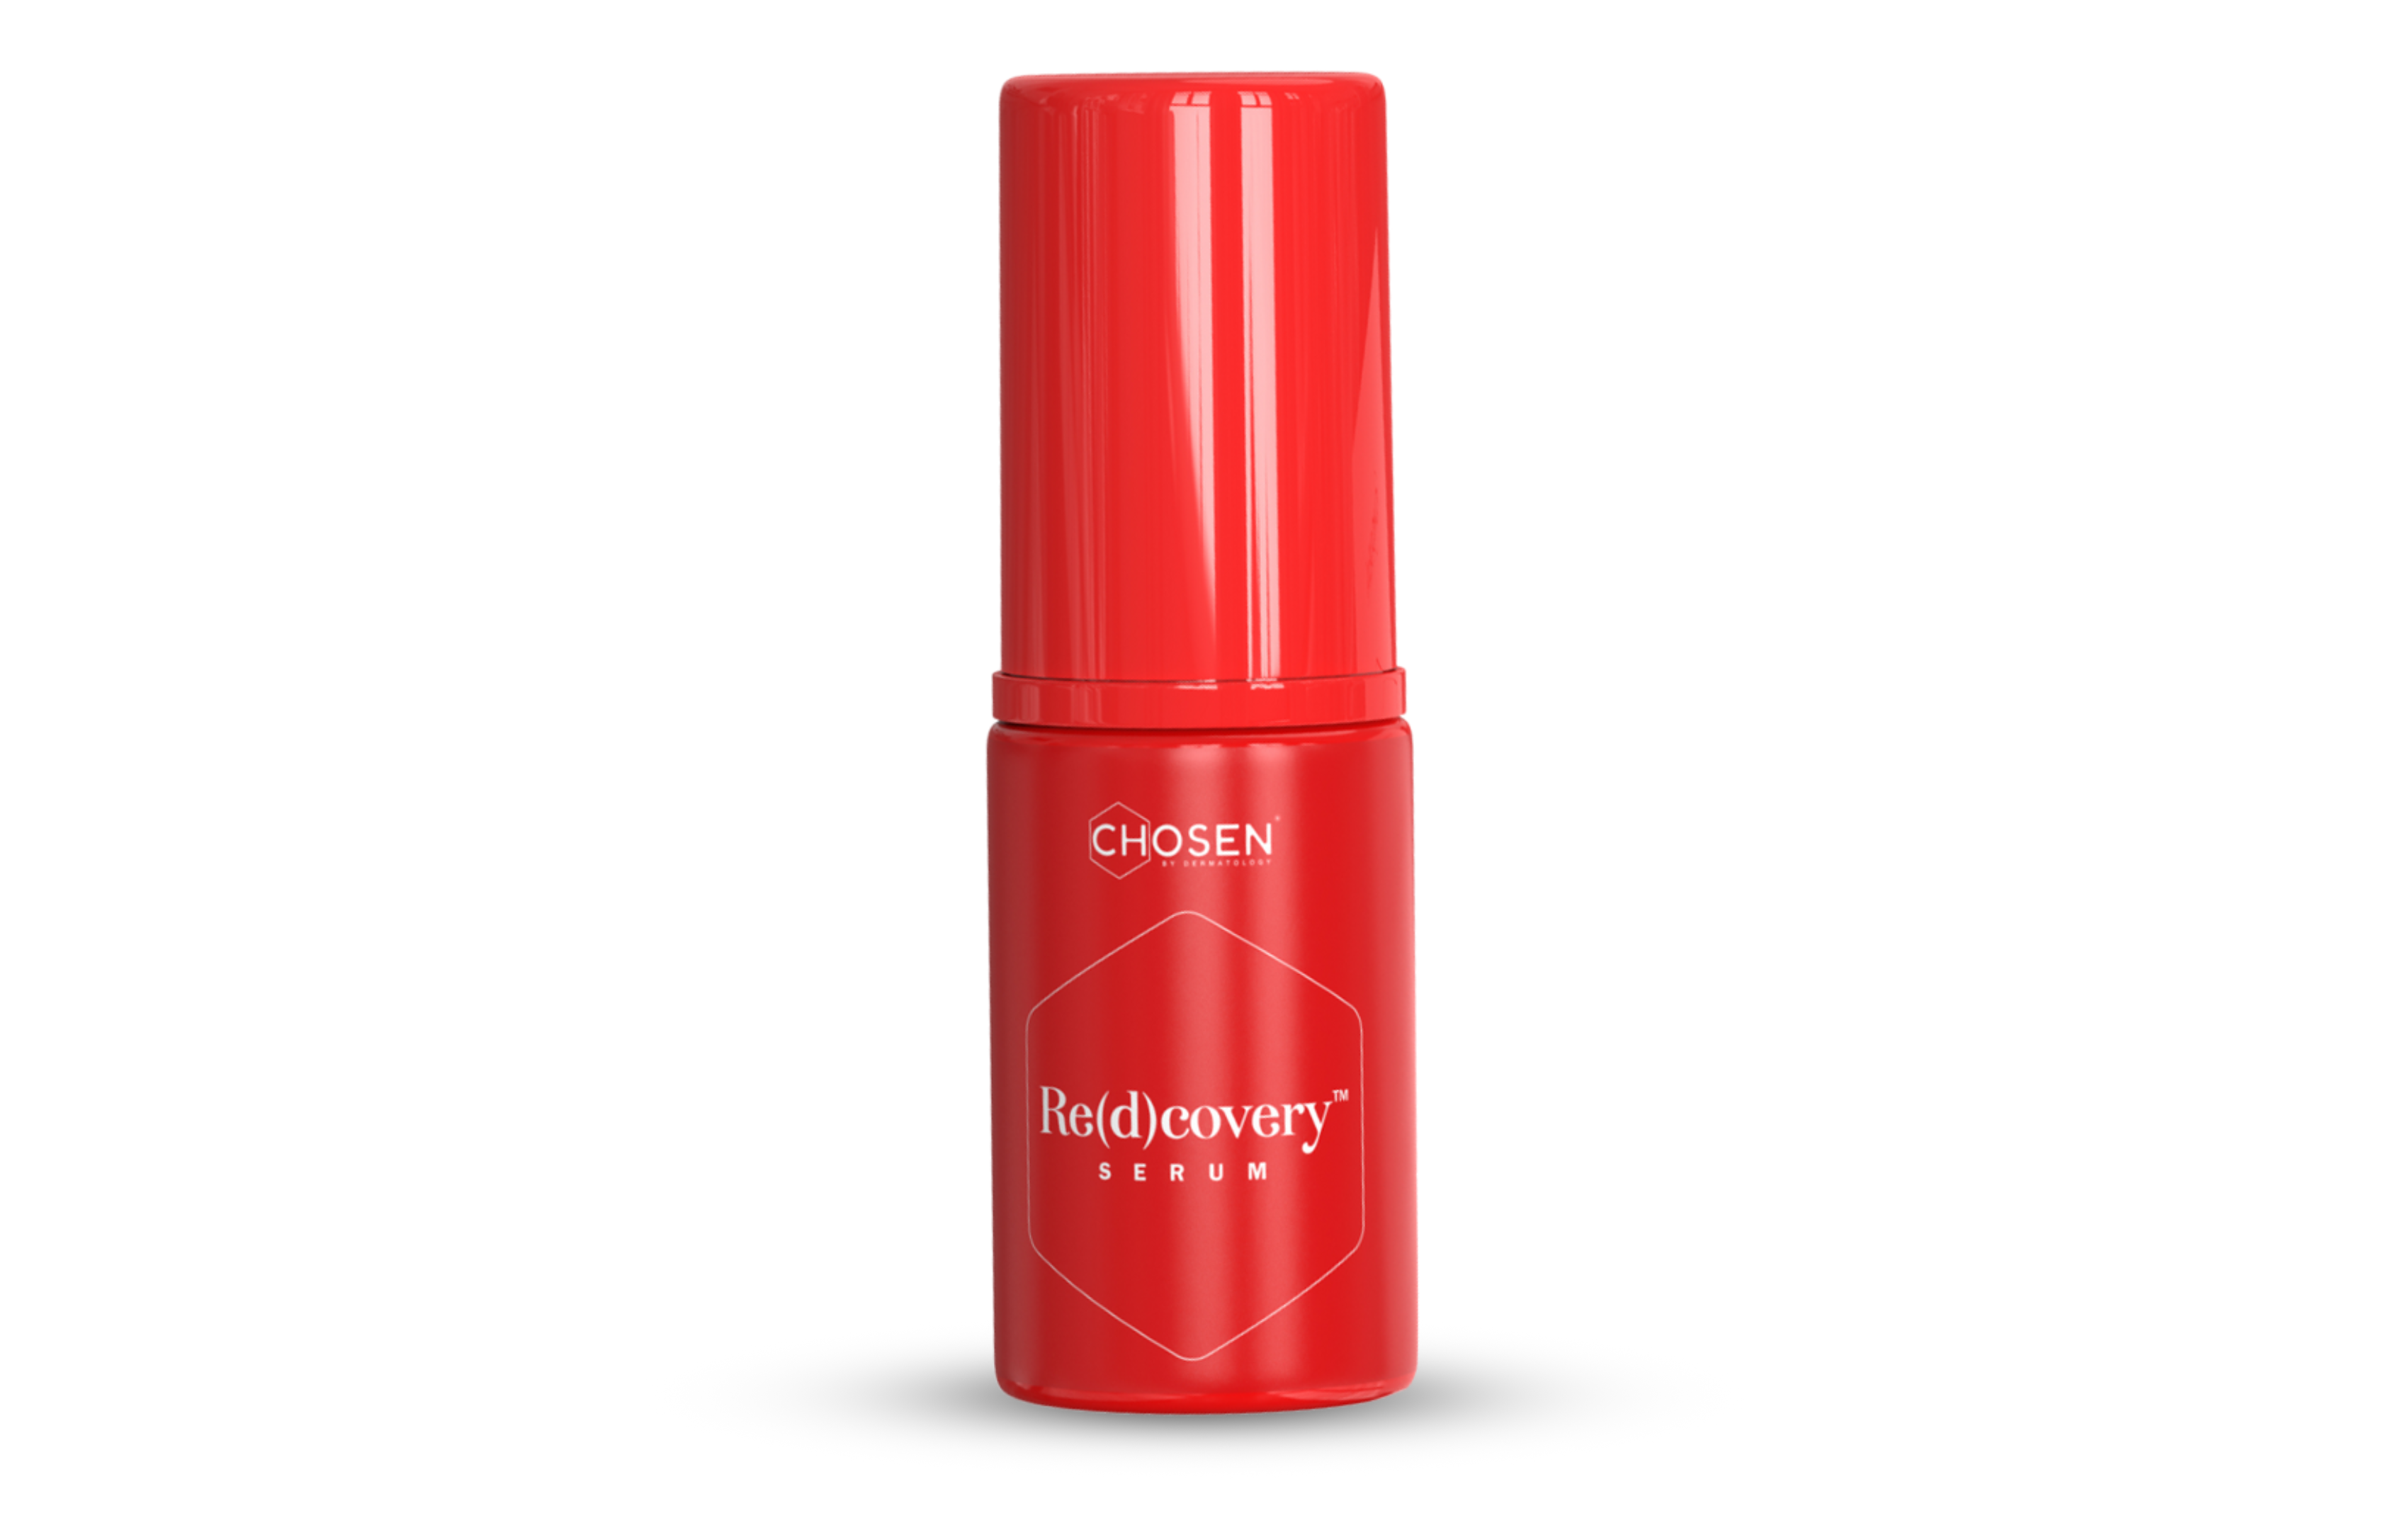 Re(d)covery® Serum